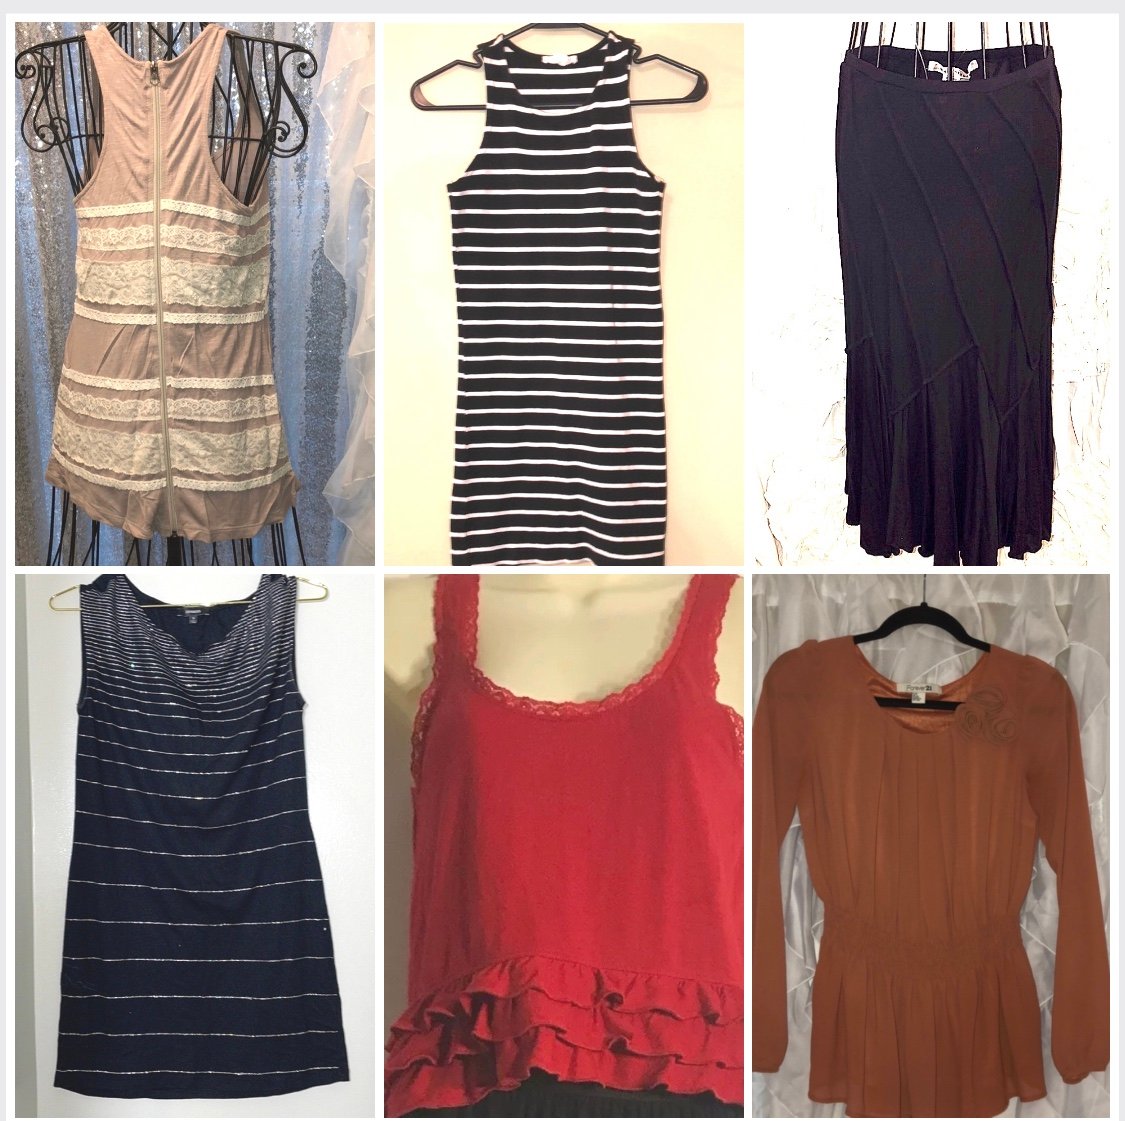 Wholesale price Bundle Women’s Small clothing bundle!! A variety of small clothing, Express, For fn4UjEECw outlet online shop